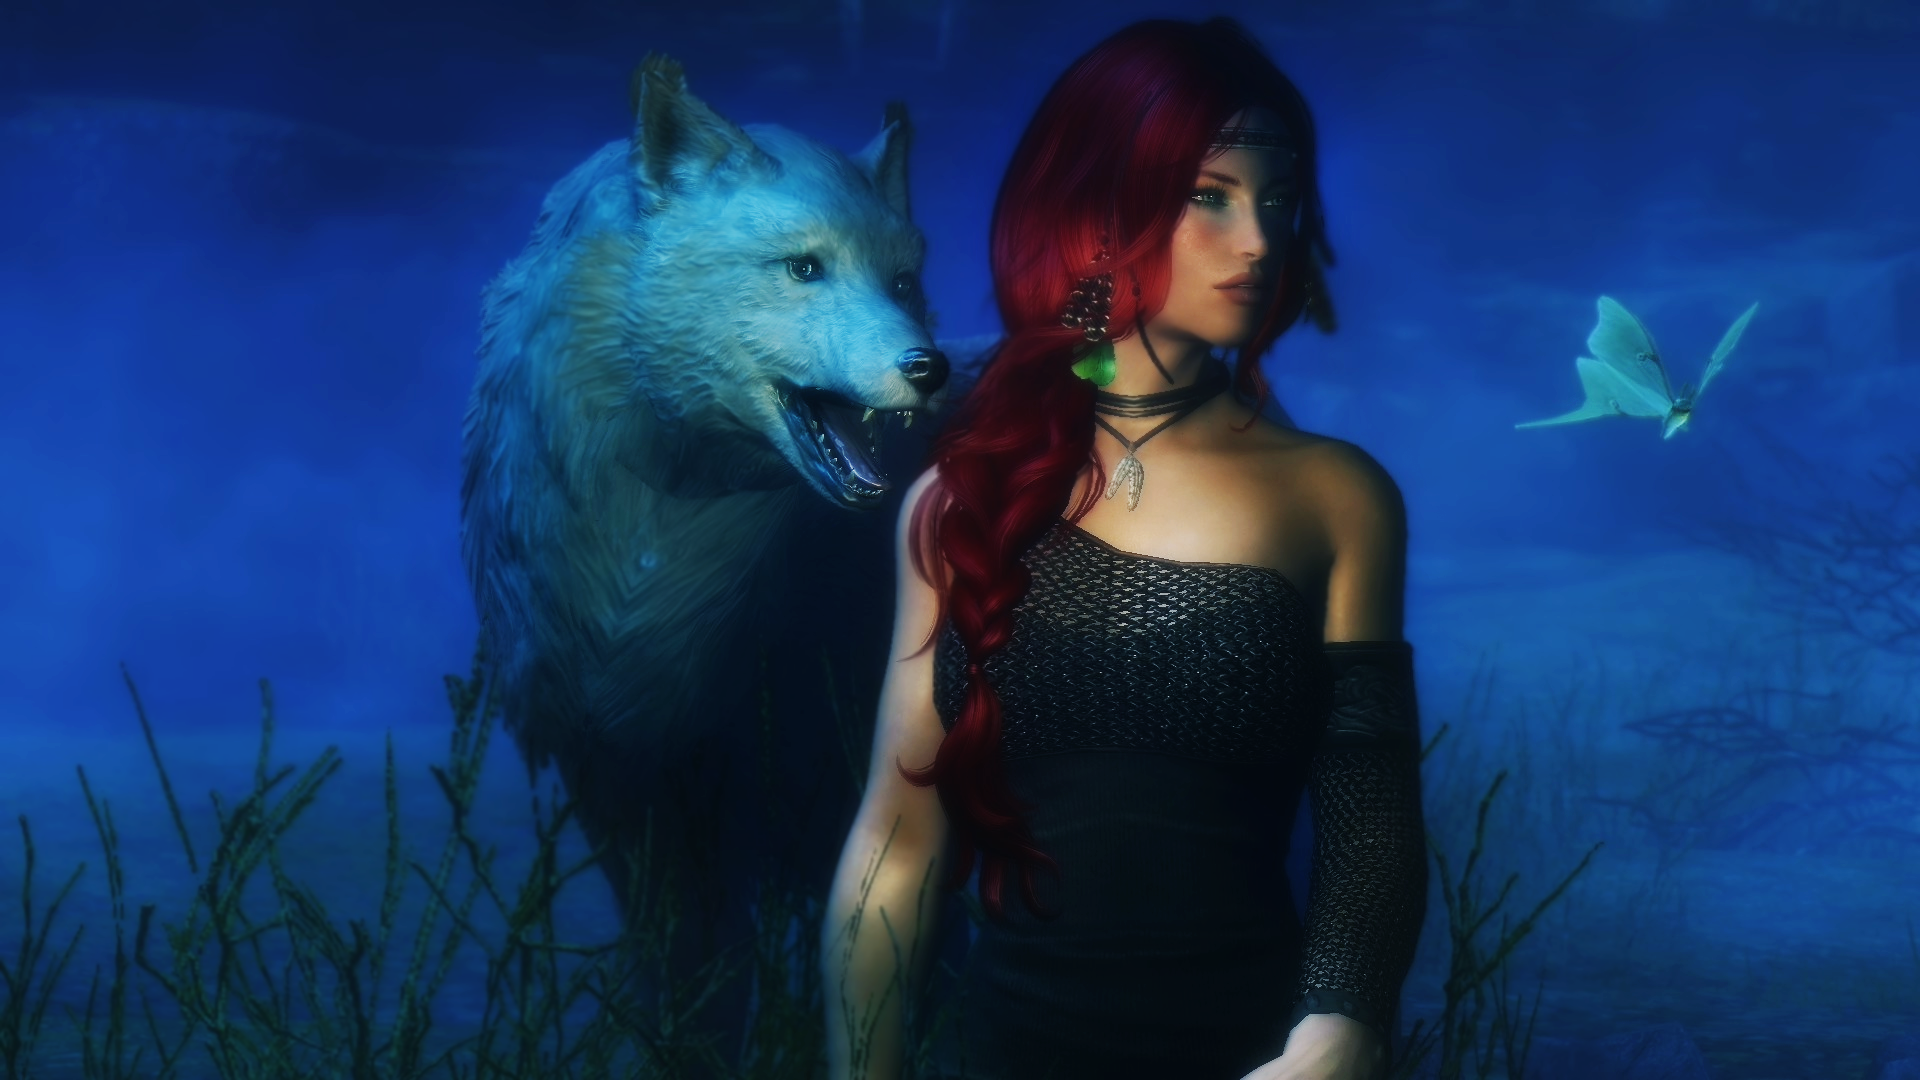 General 1920x1080 women wolf butterfly CGI fantasy art fantasy girl redhead creature necklace looking into the distance